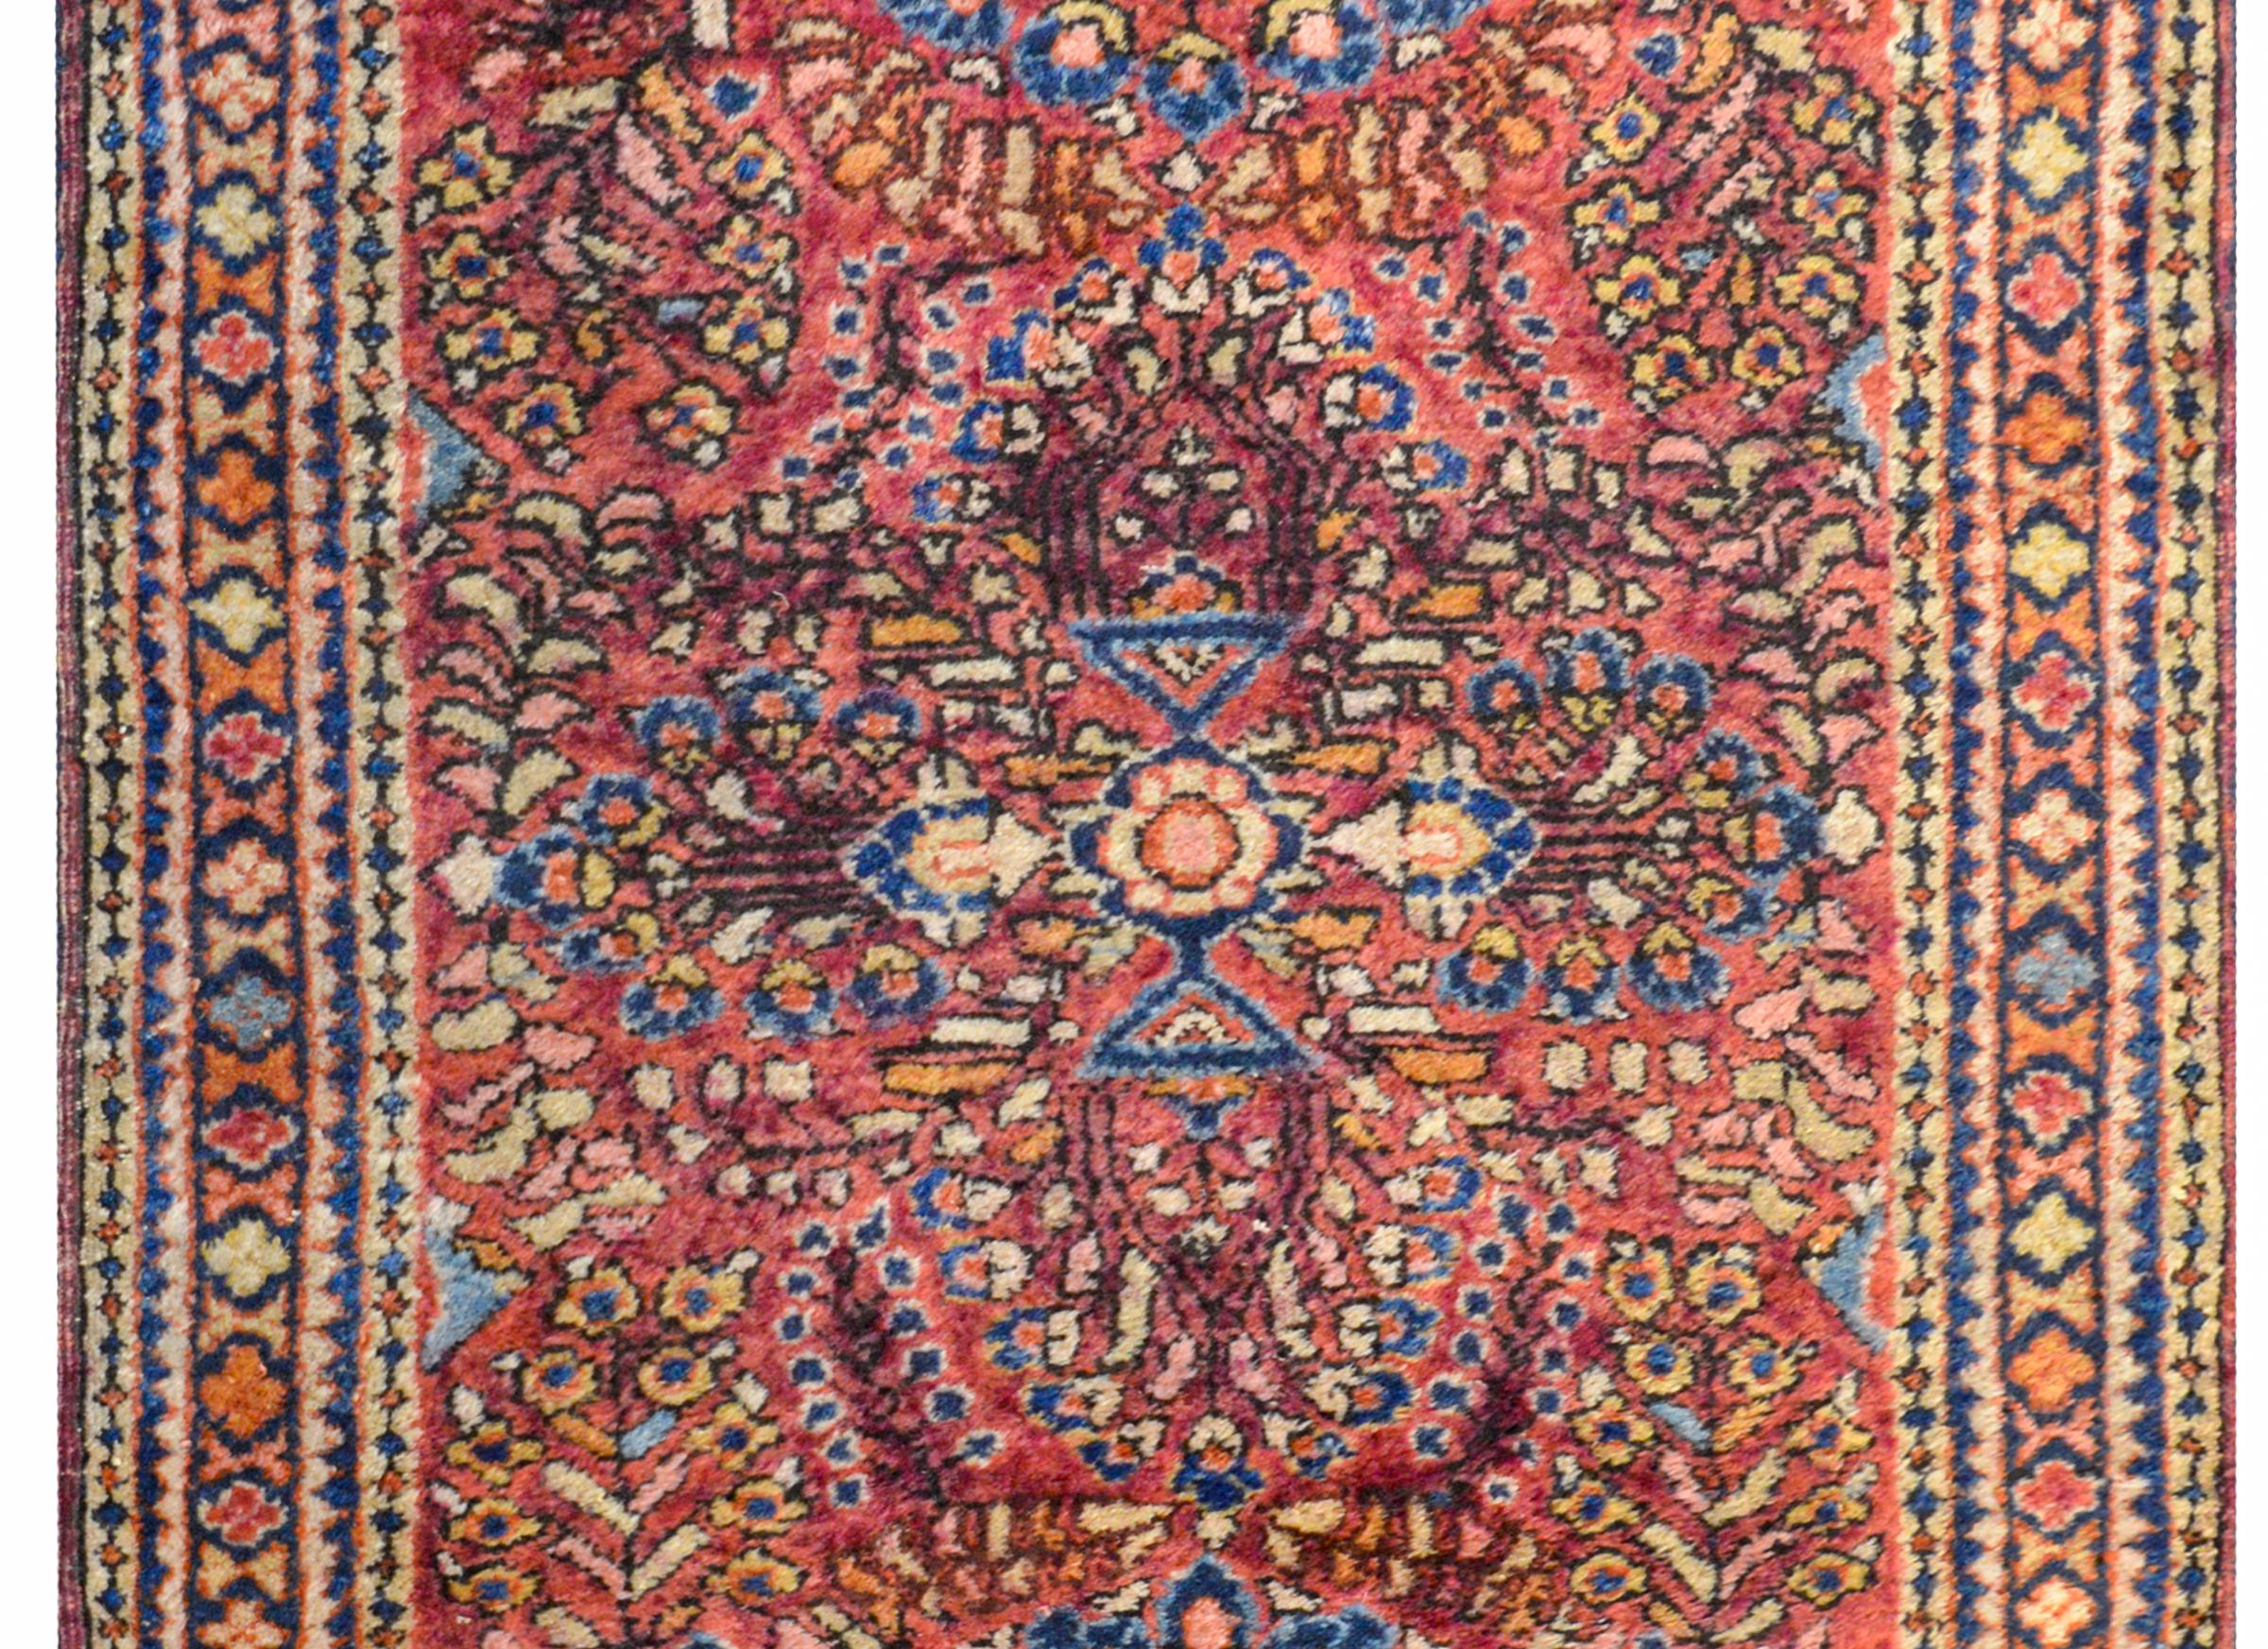 A traditional early 20th century Persian Sarouk rug with a large-scale mirrored floral tree of life pattern woven in cranberry, gold, indigo, and orange, on a cranberry background. The border is composed with multiple petite geometric pattered